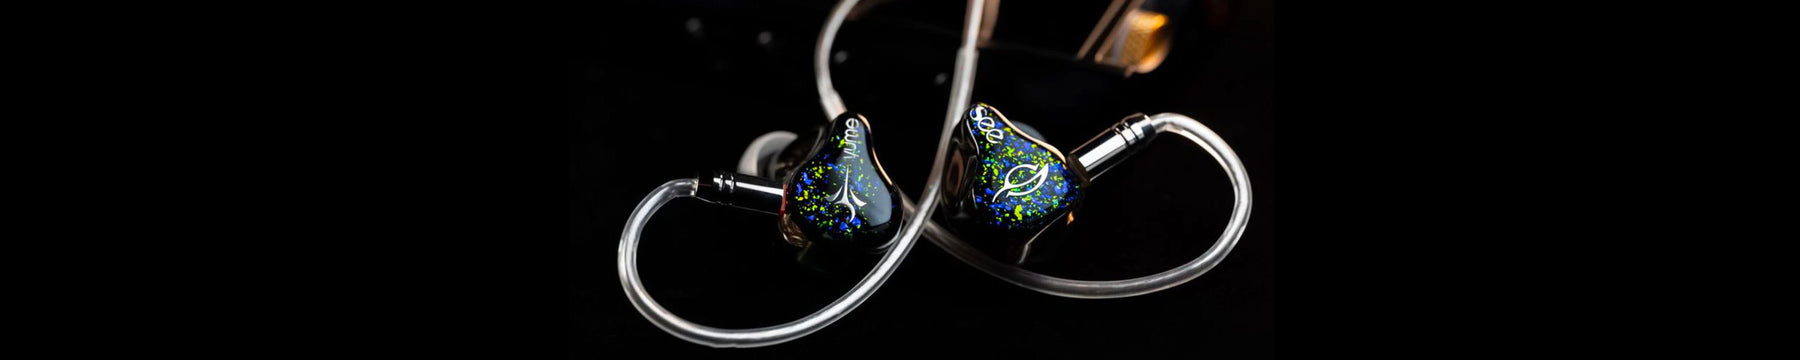 See Audio Yume Ultra 1DD+2BA Hybrid IEMs: Four Upgrades With The All-New Yume Ultra